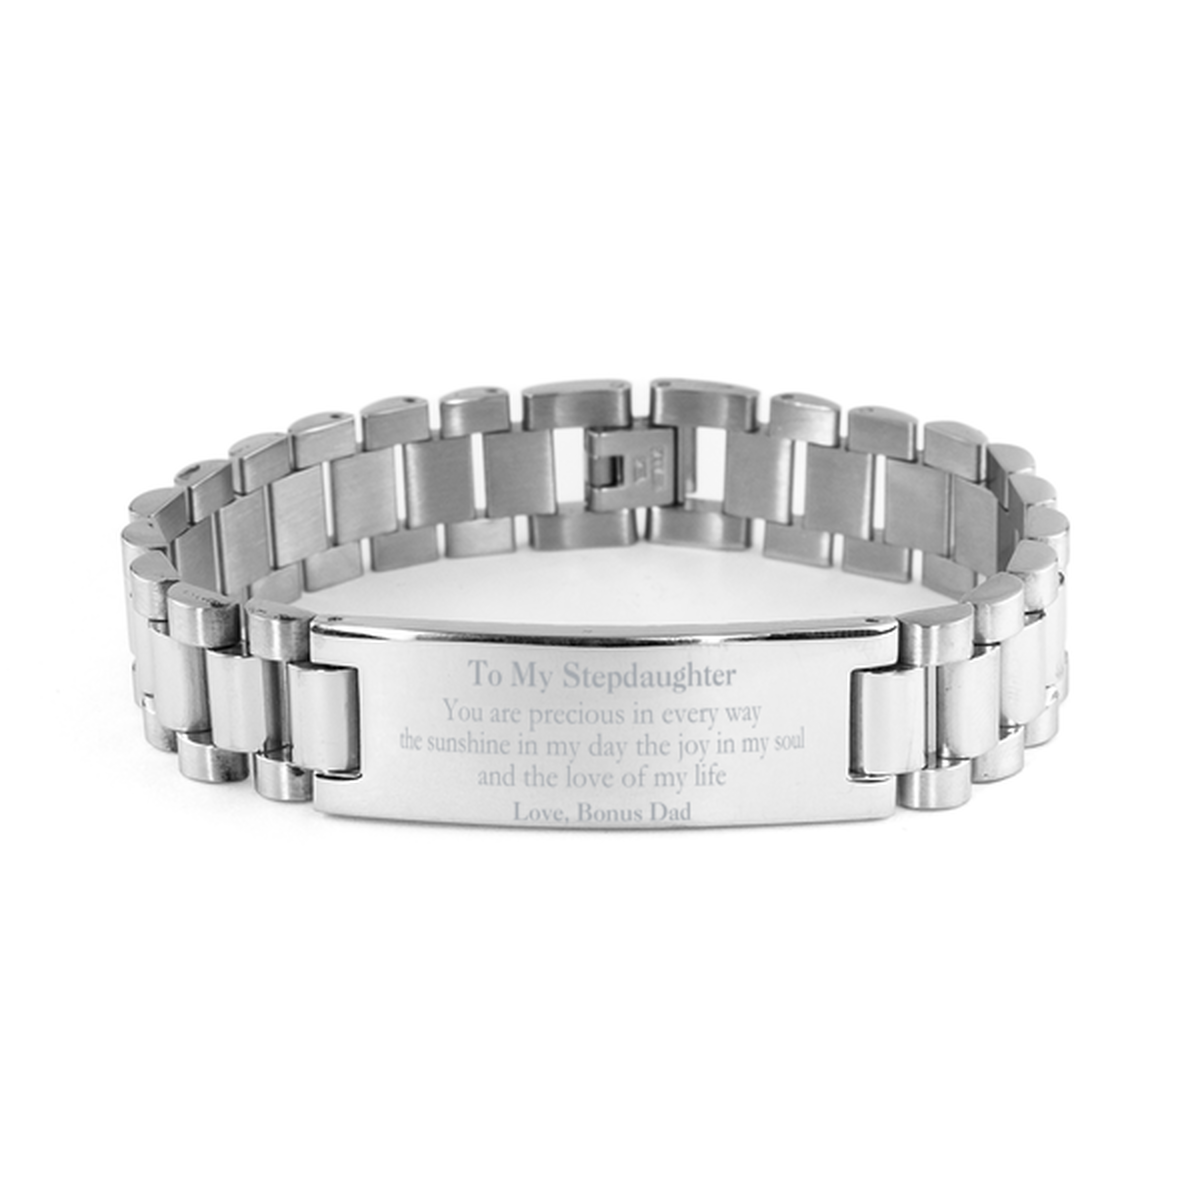 Graduation Gifts for Stepdaughter Ladder Stainless Steel Bracelet Present from Bonus Dad, Christmas Stepdaughter Birthday Gifts Stepdaughter You are precious in every way the sunshine in my day. Love, Bonus Dad